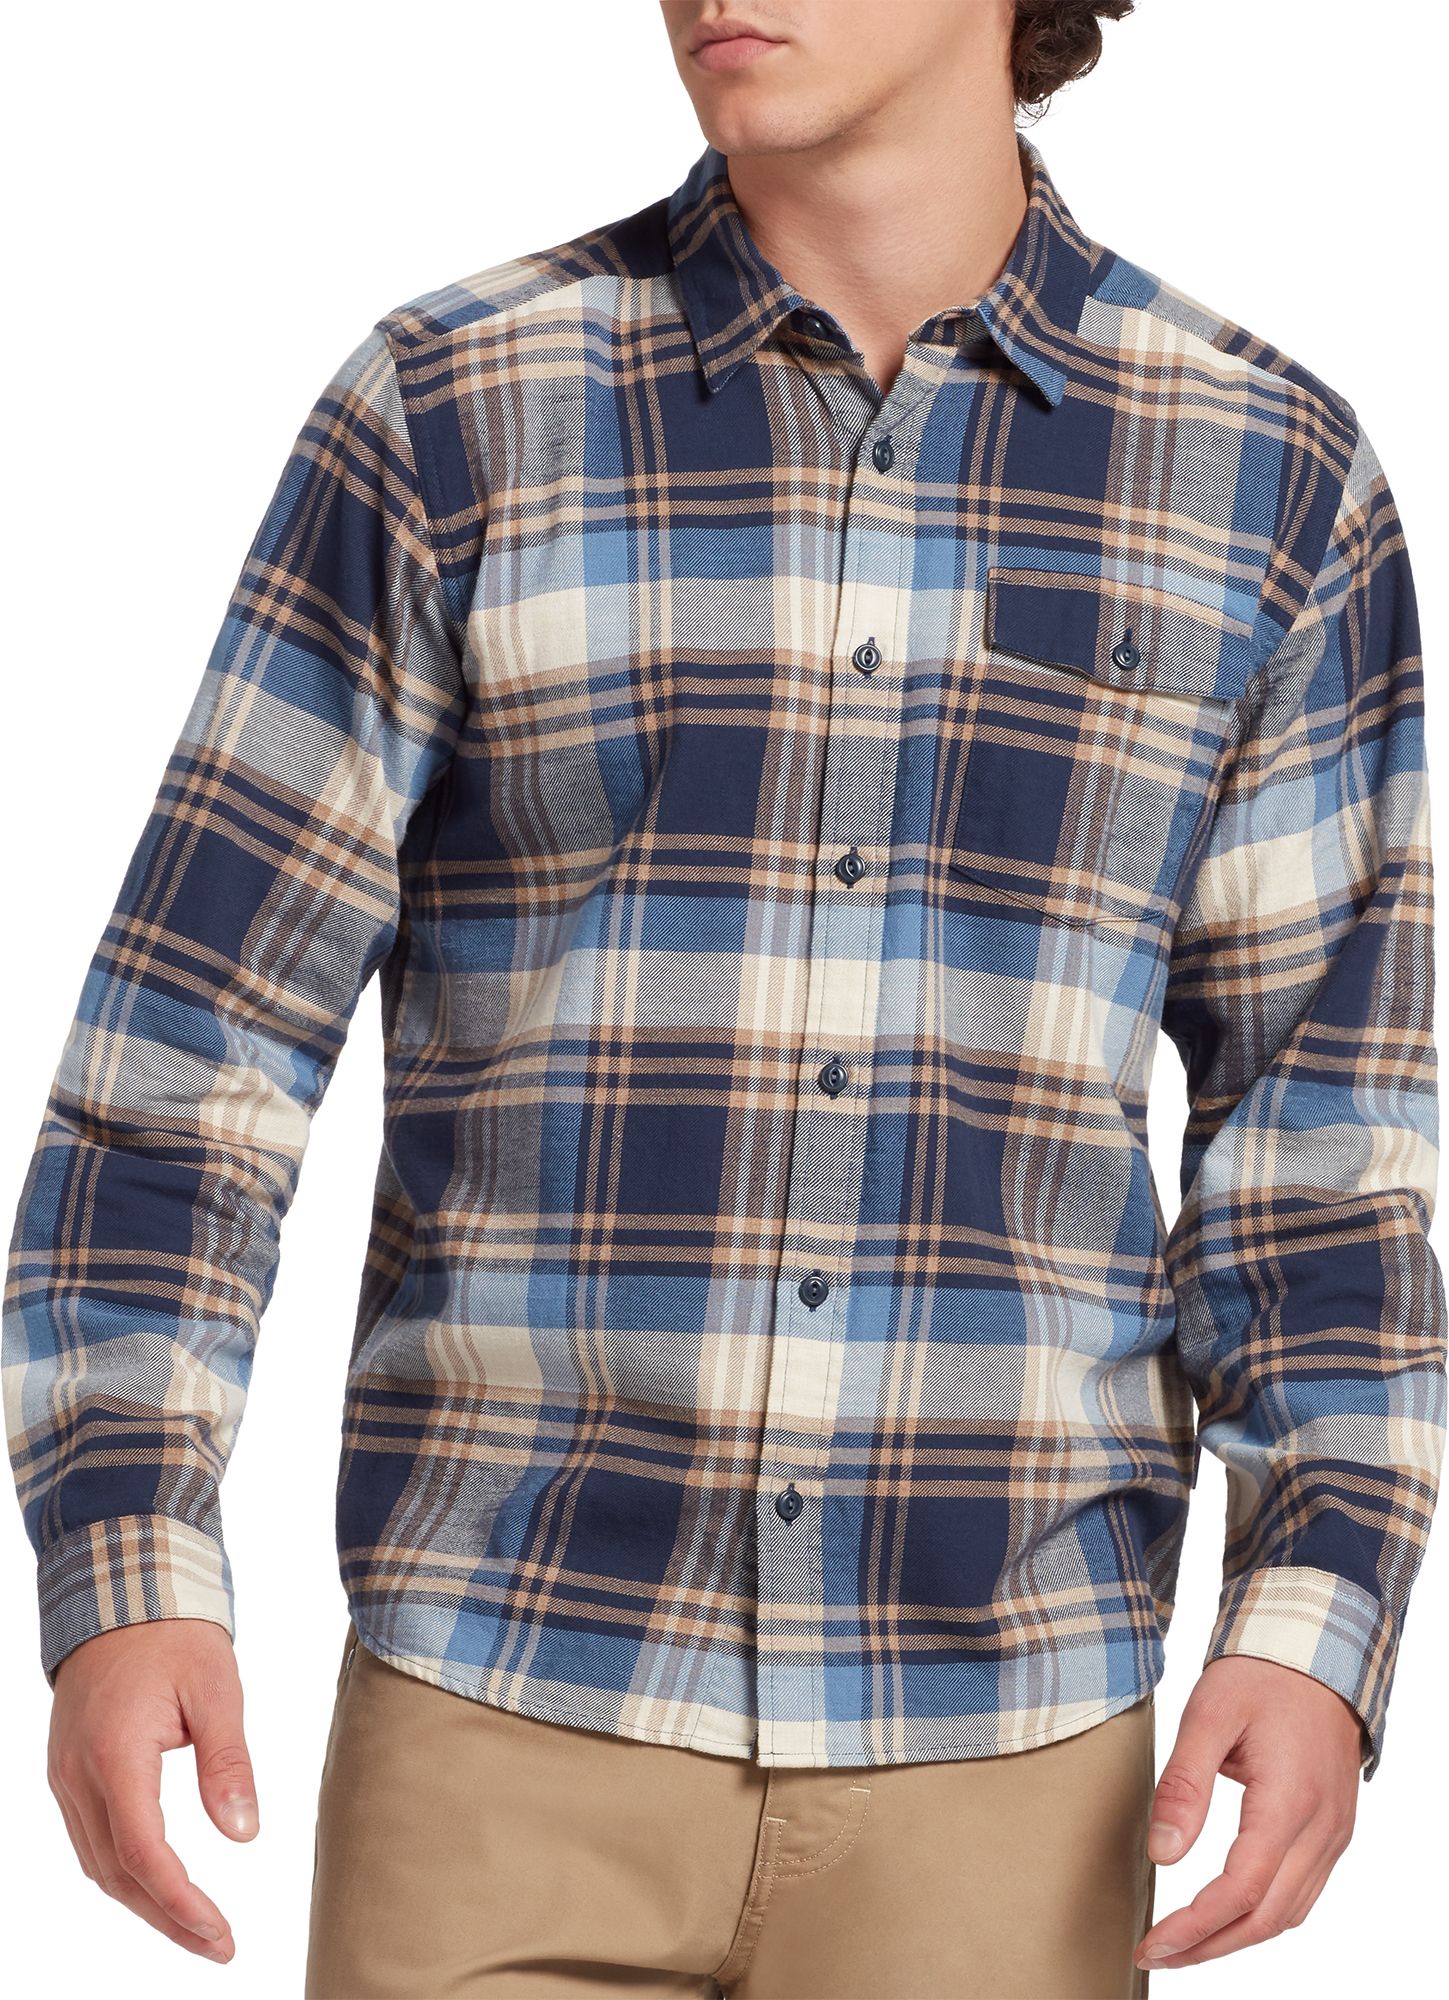 patagonia flannel